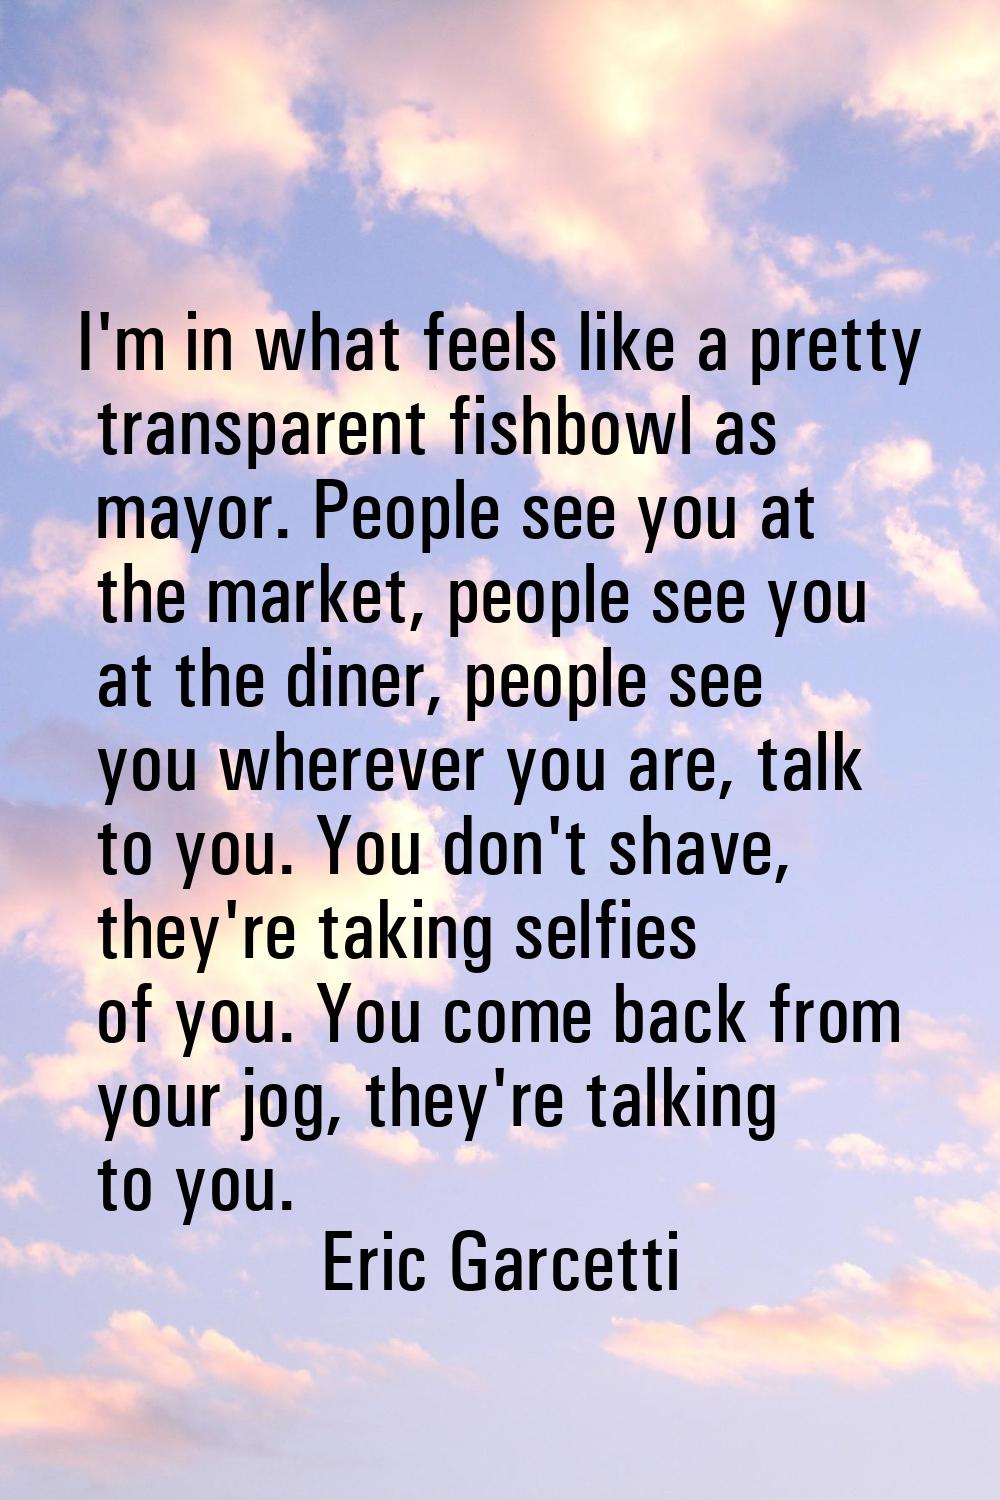 I'm in what feels like a pretty transparent fishbowl as mayor. People see you at the market, people